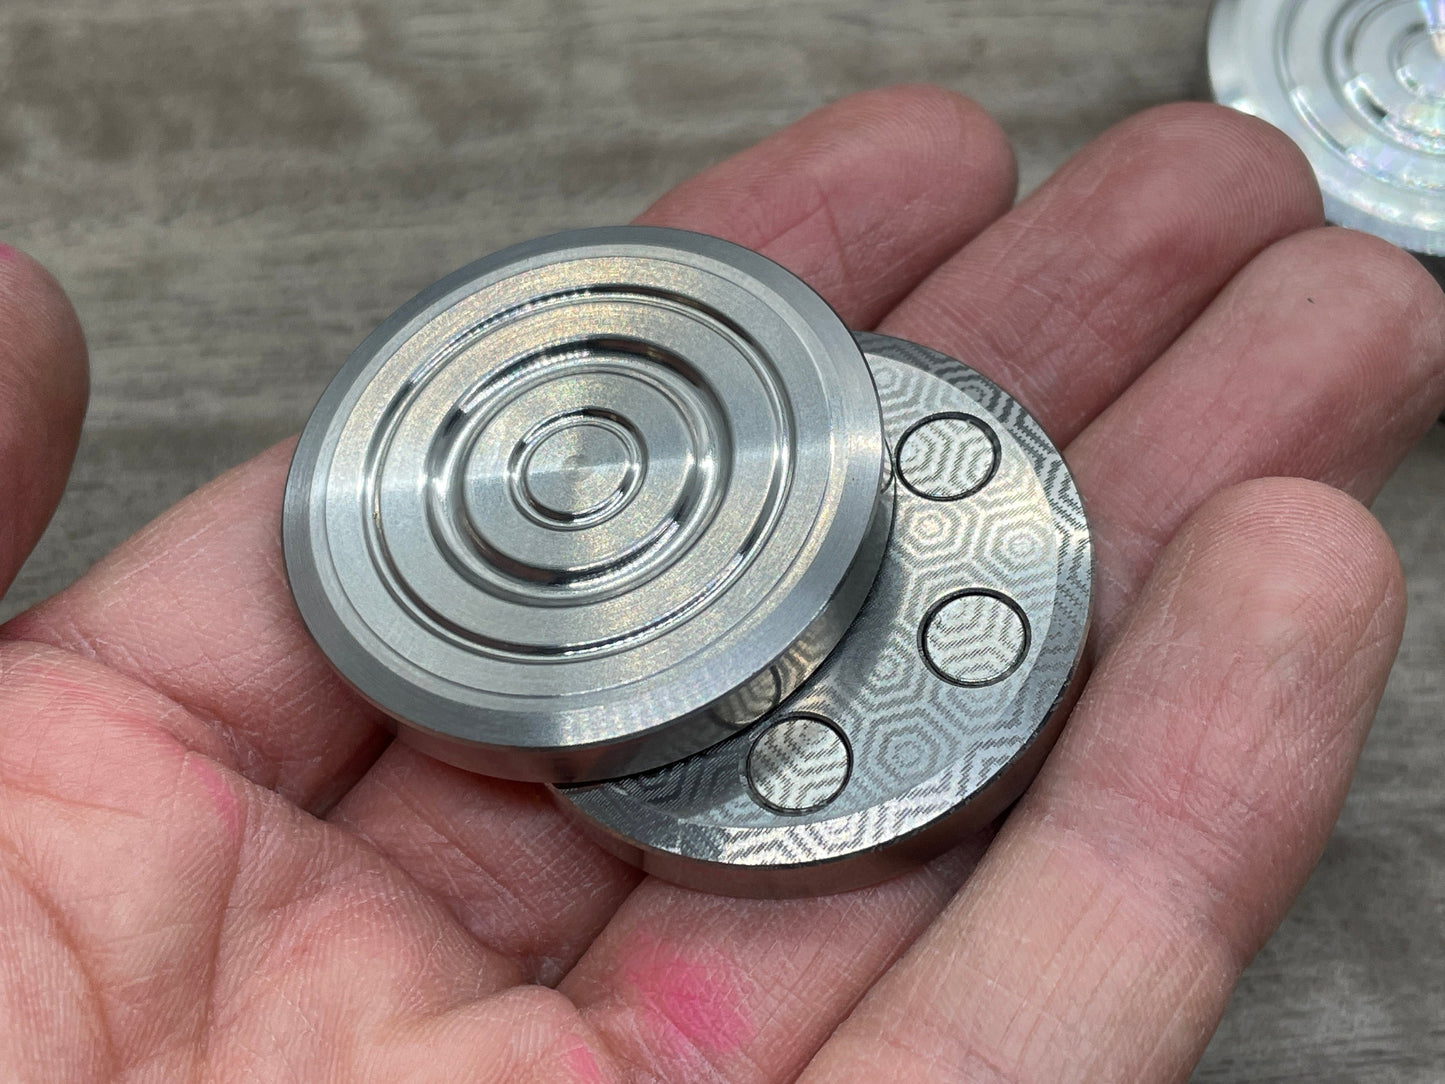 ORBITER HAPTIC Coins Stainless Steel Haptic Coins Adhd Fidget